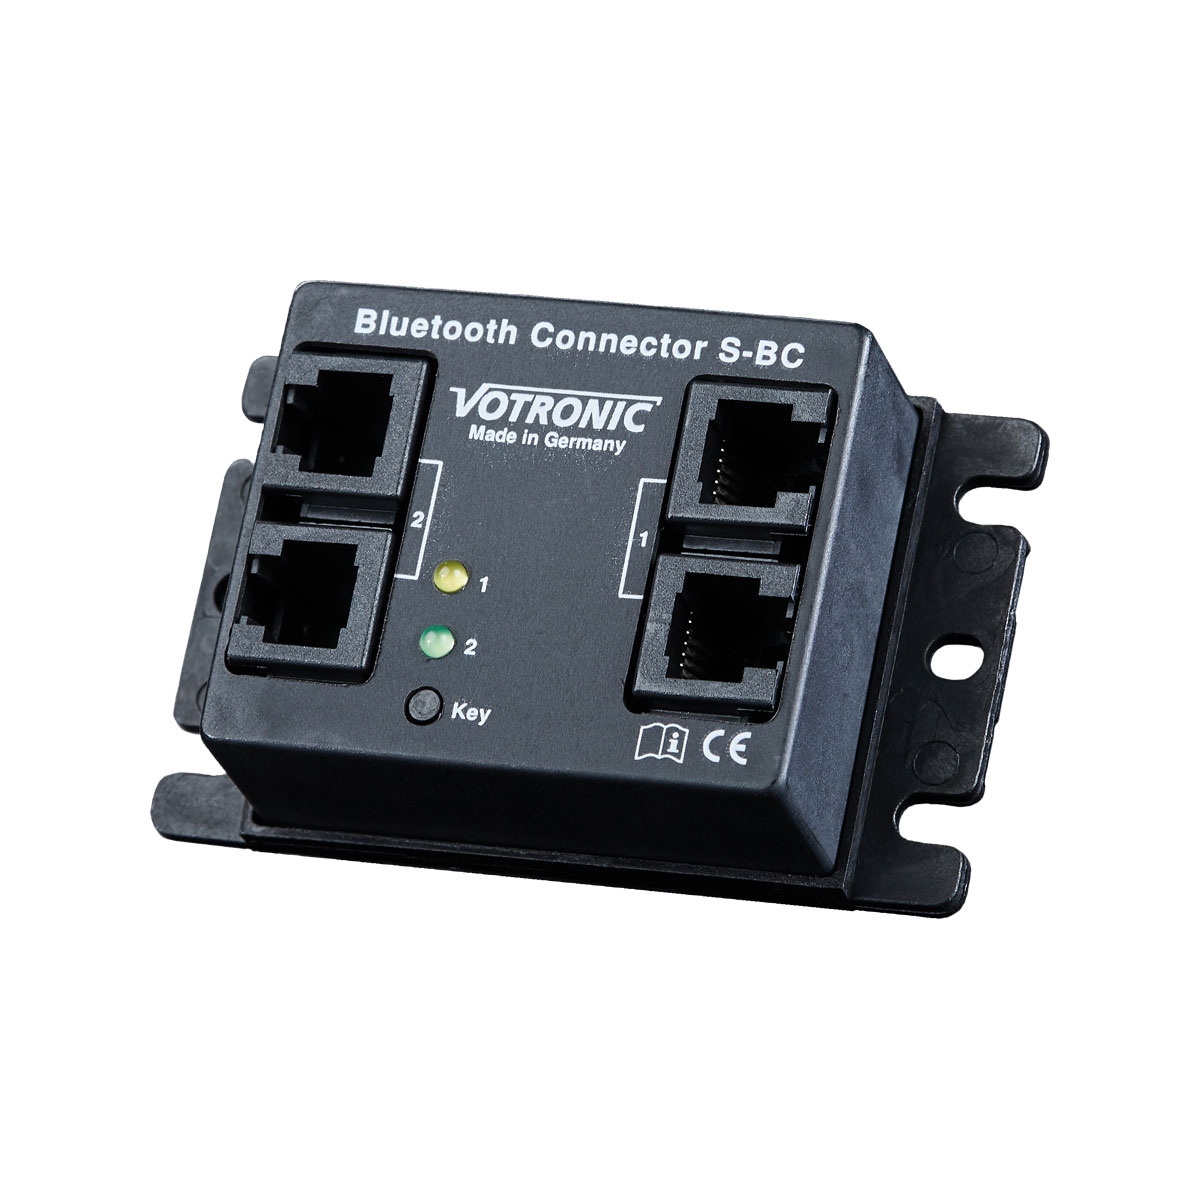 VOTRONIC Bluetooth Connector S-BC inkl. Energy Monitor App - 1430